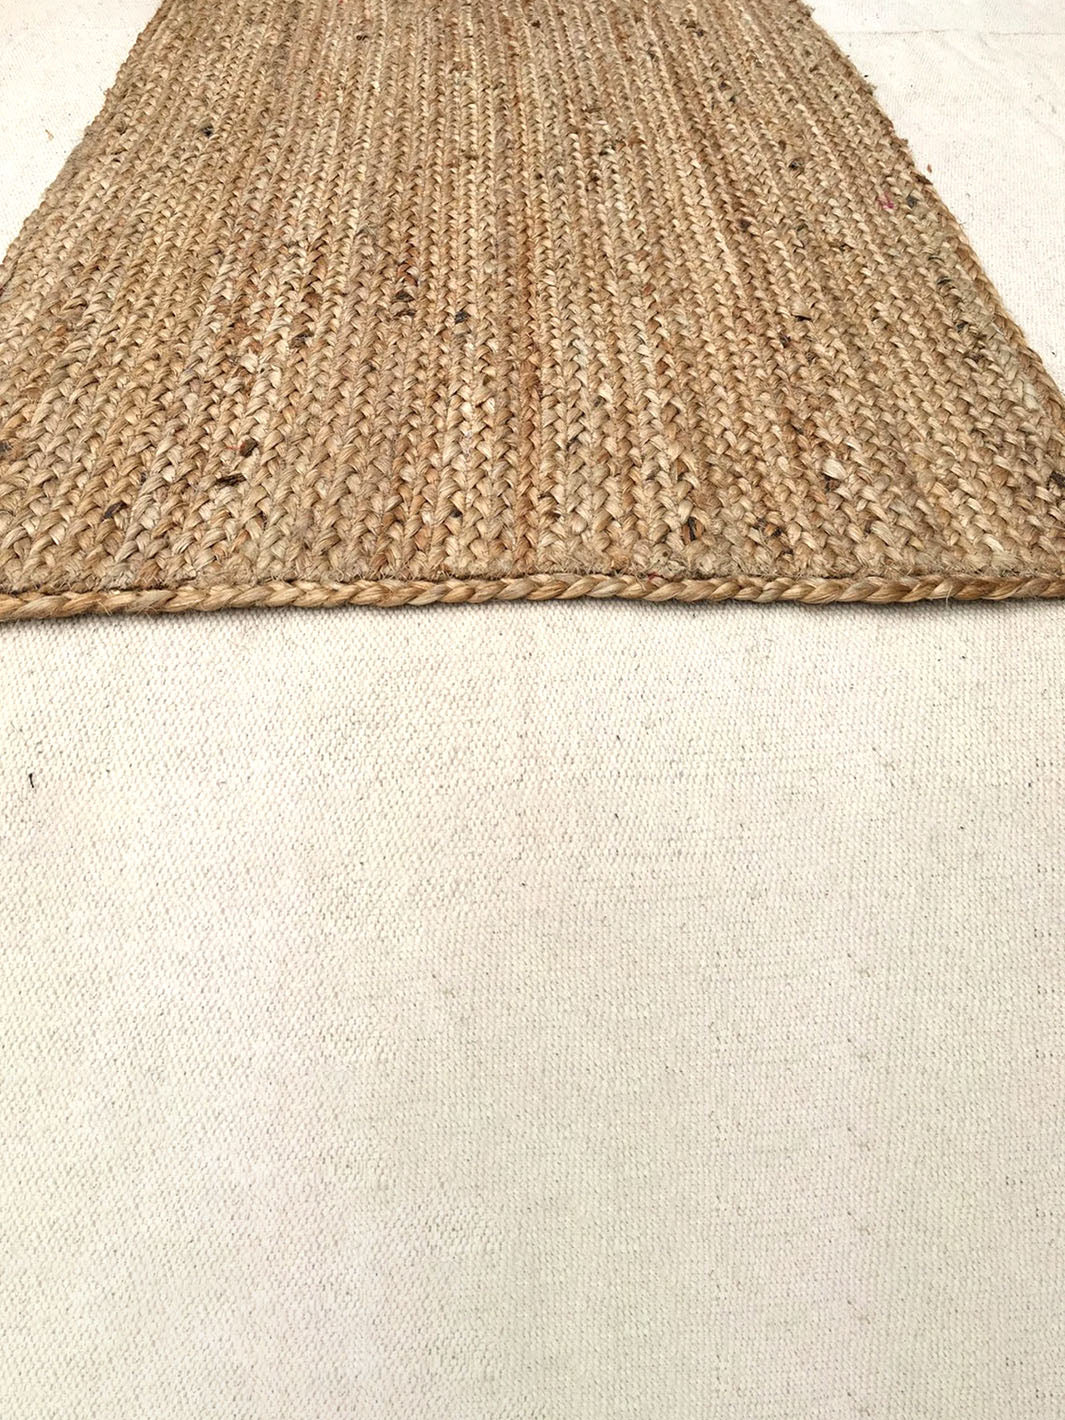 Handcrafted Braided Square Jute Rug Chouhan Rugs CRH0219-3